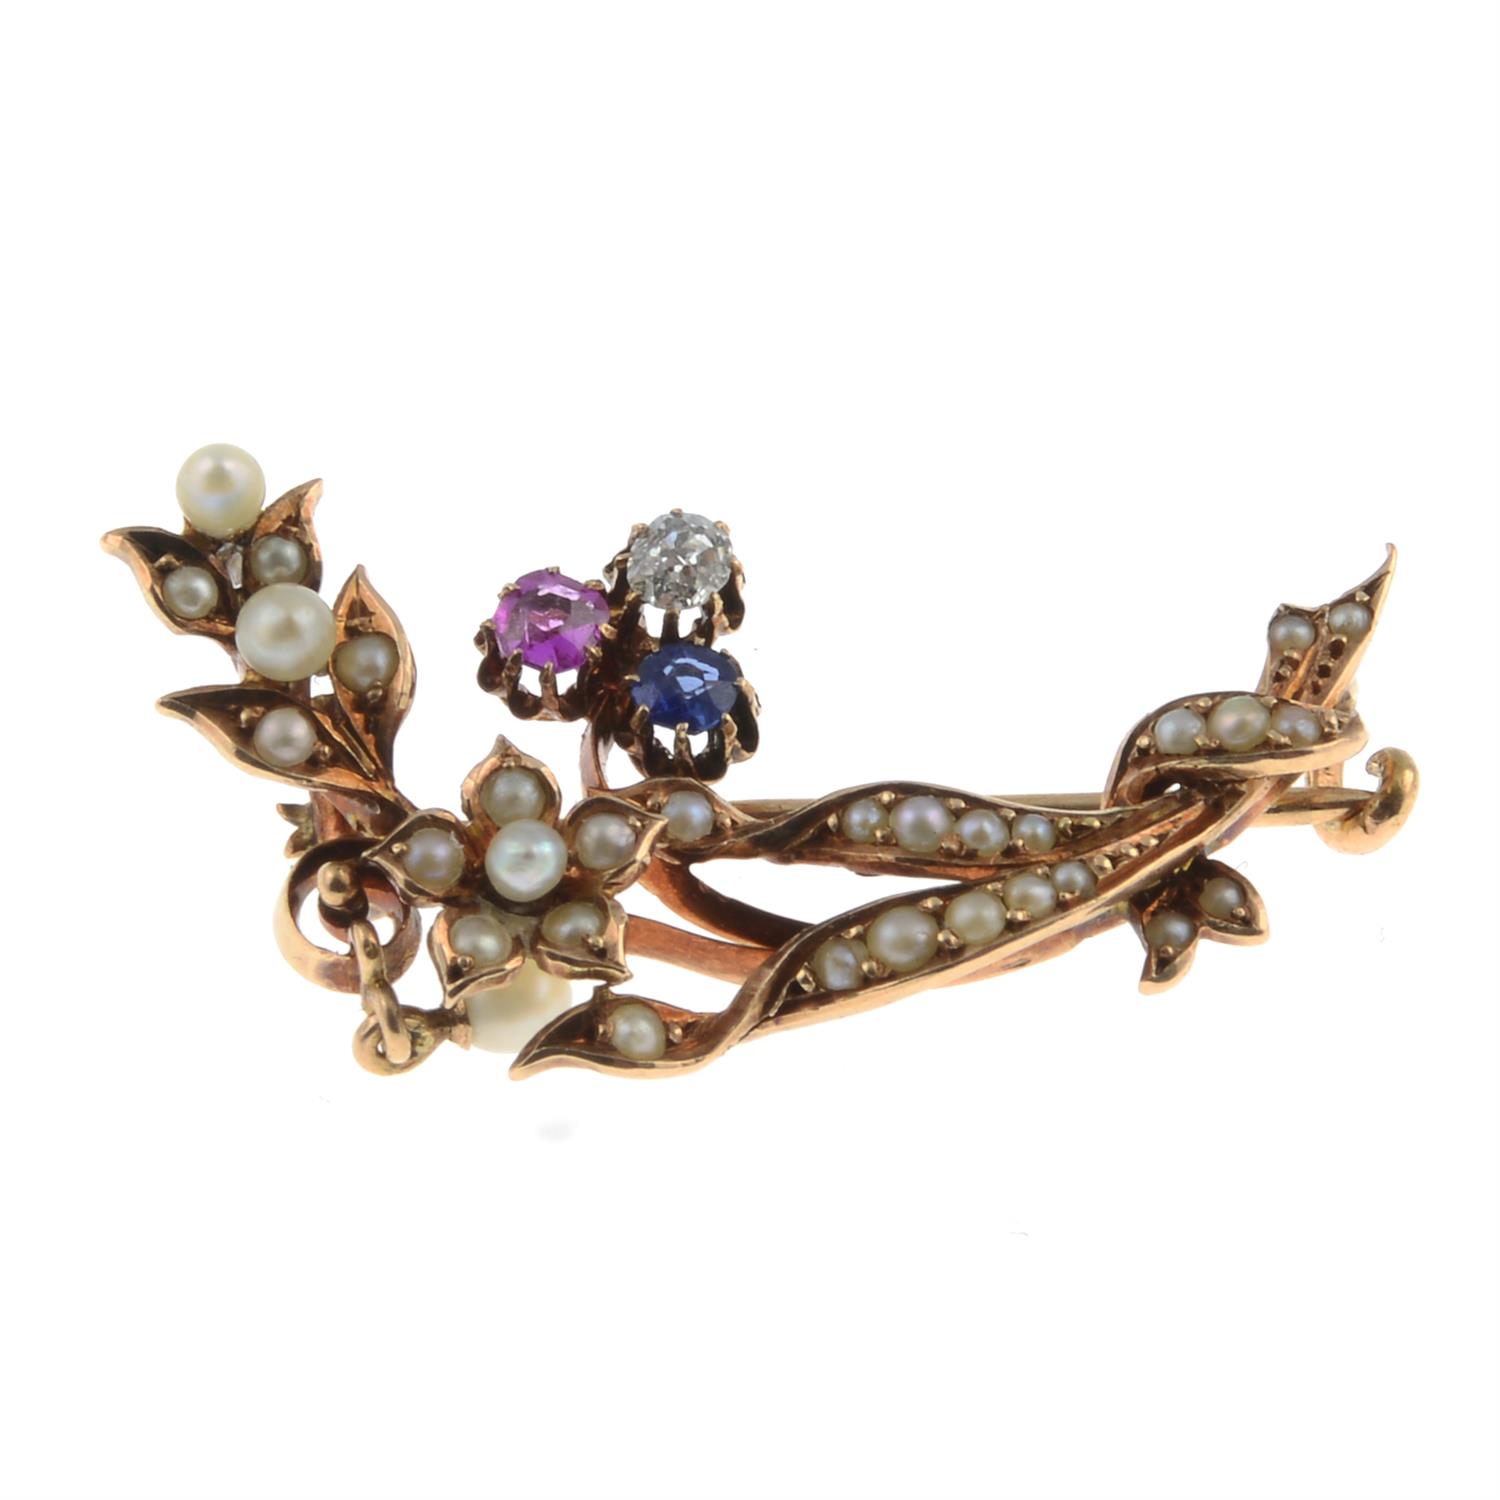 Early 20th gold diamond & gem floral brooch